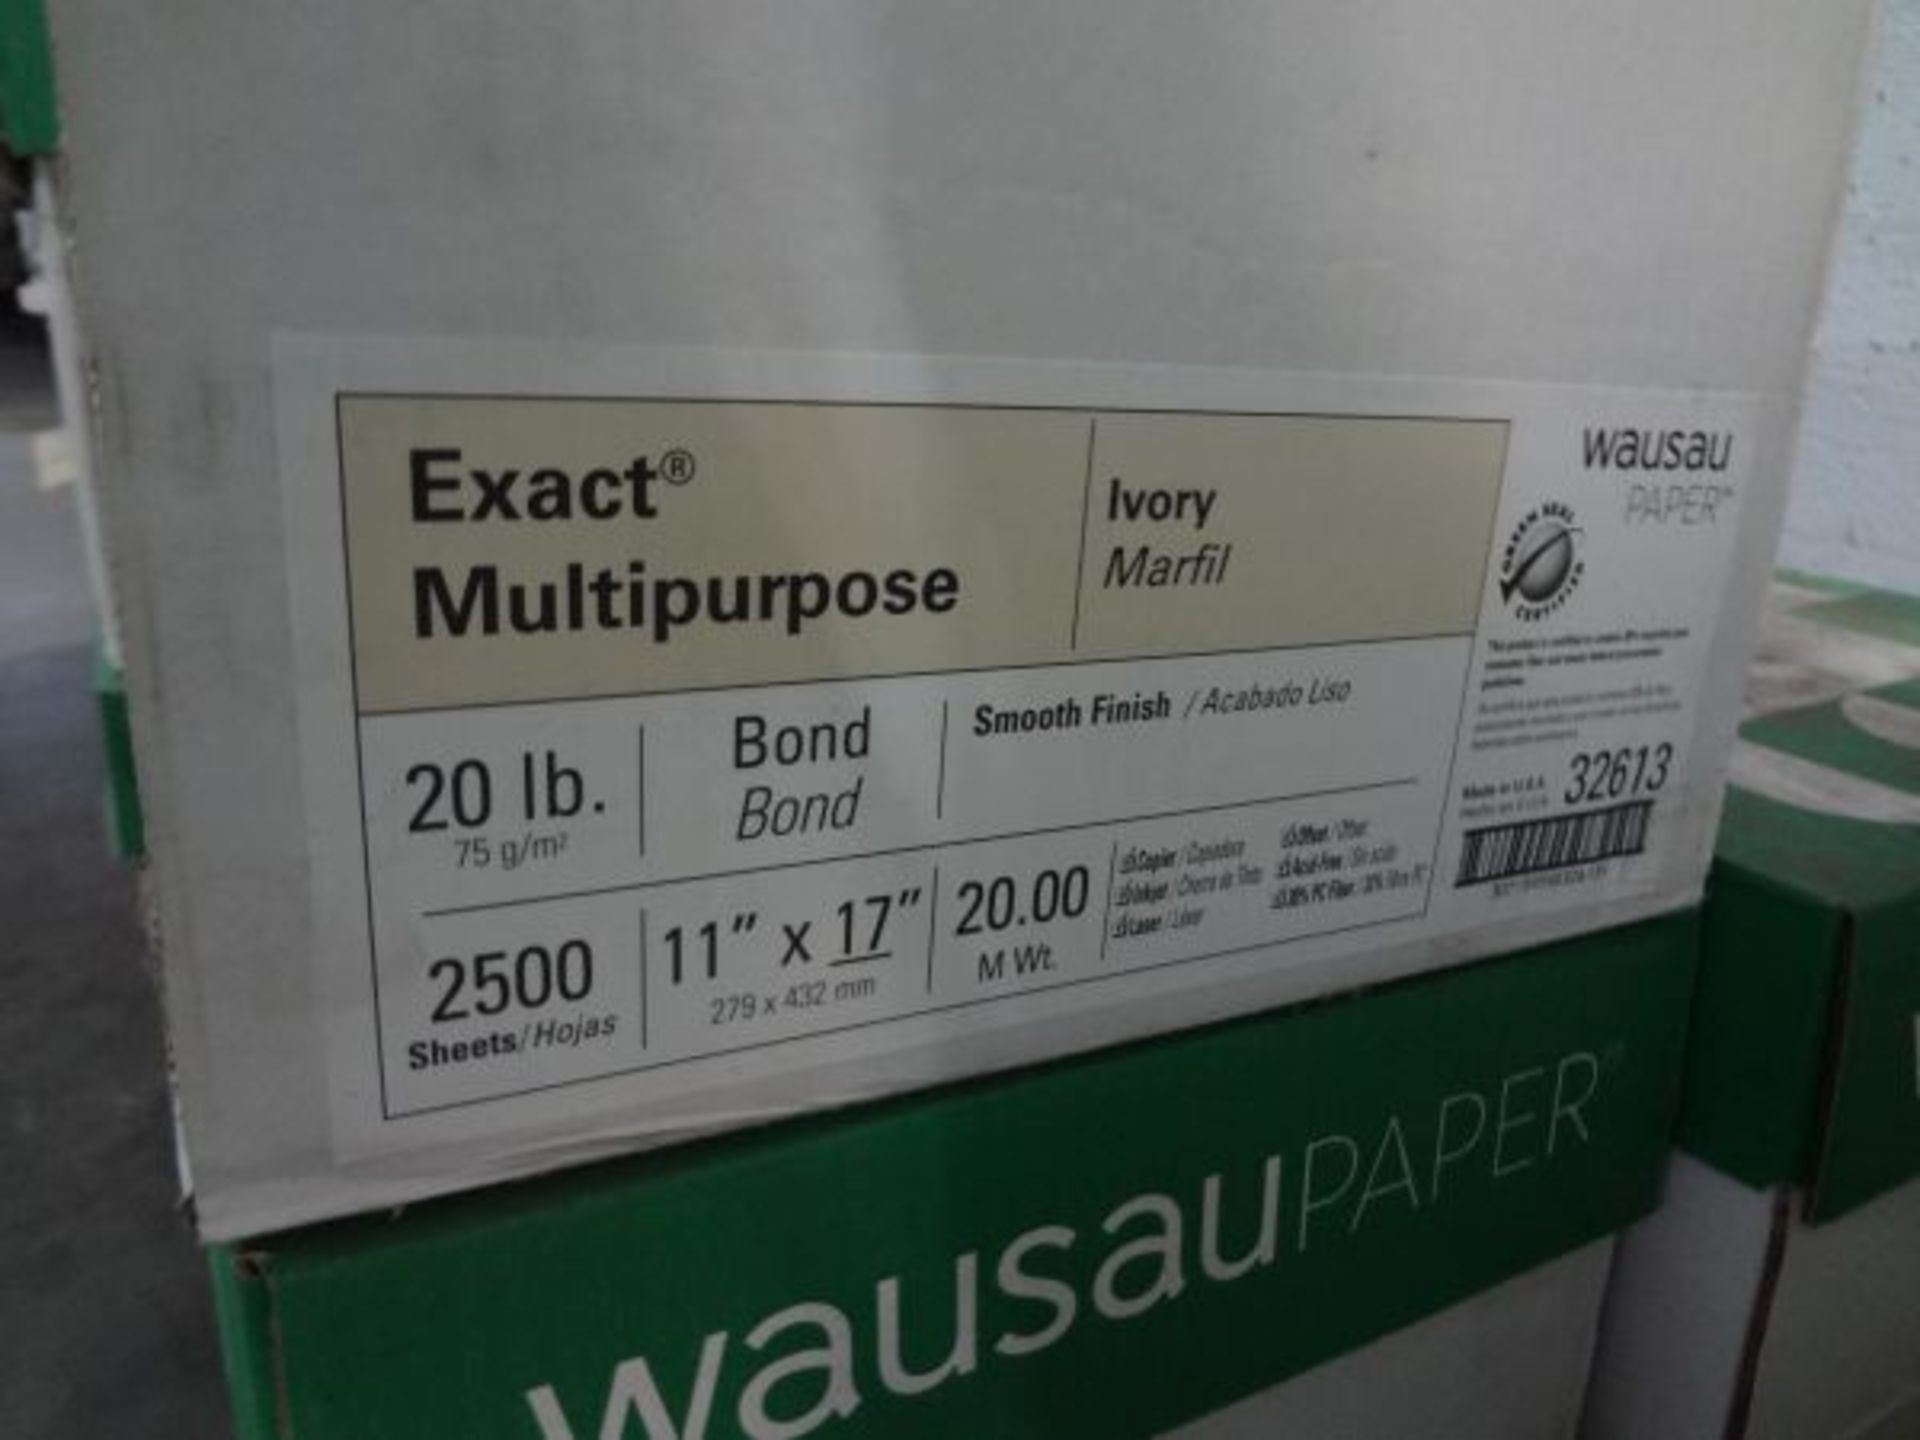 (5) CASES 11" X 17" WAUSAU PAPER EXACT INDEX BLUE PAPER, (3) CASES WAUSAU PAPER EXACT MULTIPURPOSE - Image 3 of 3